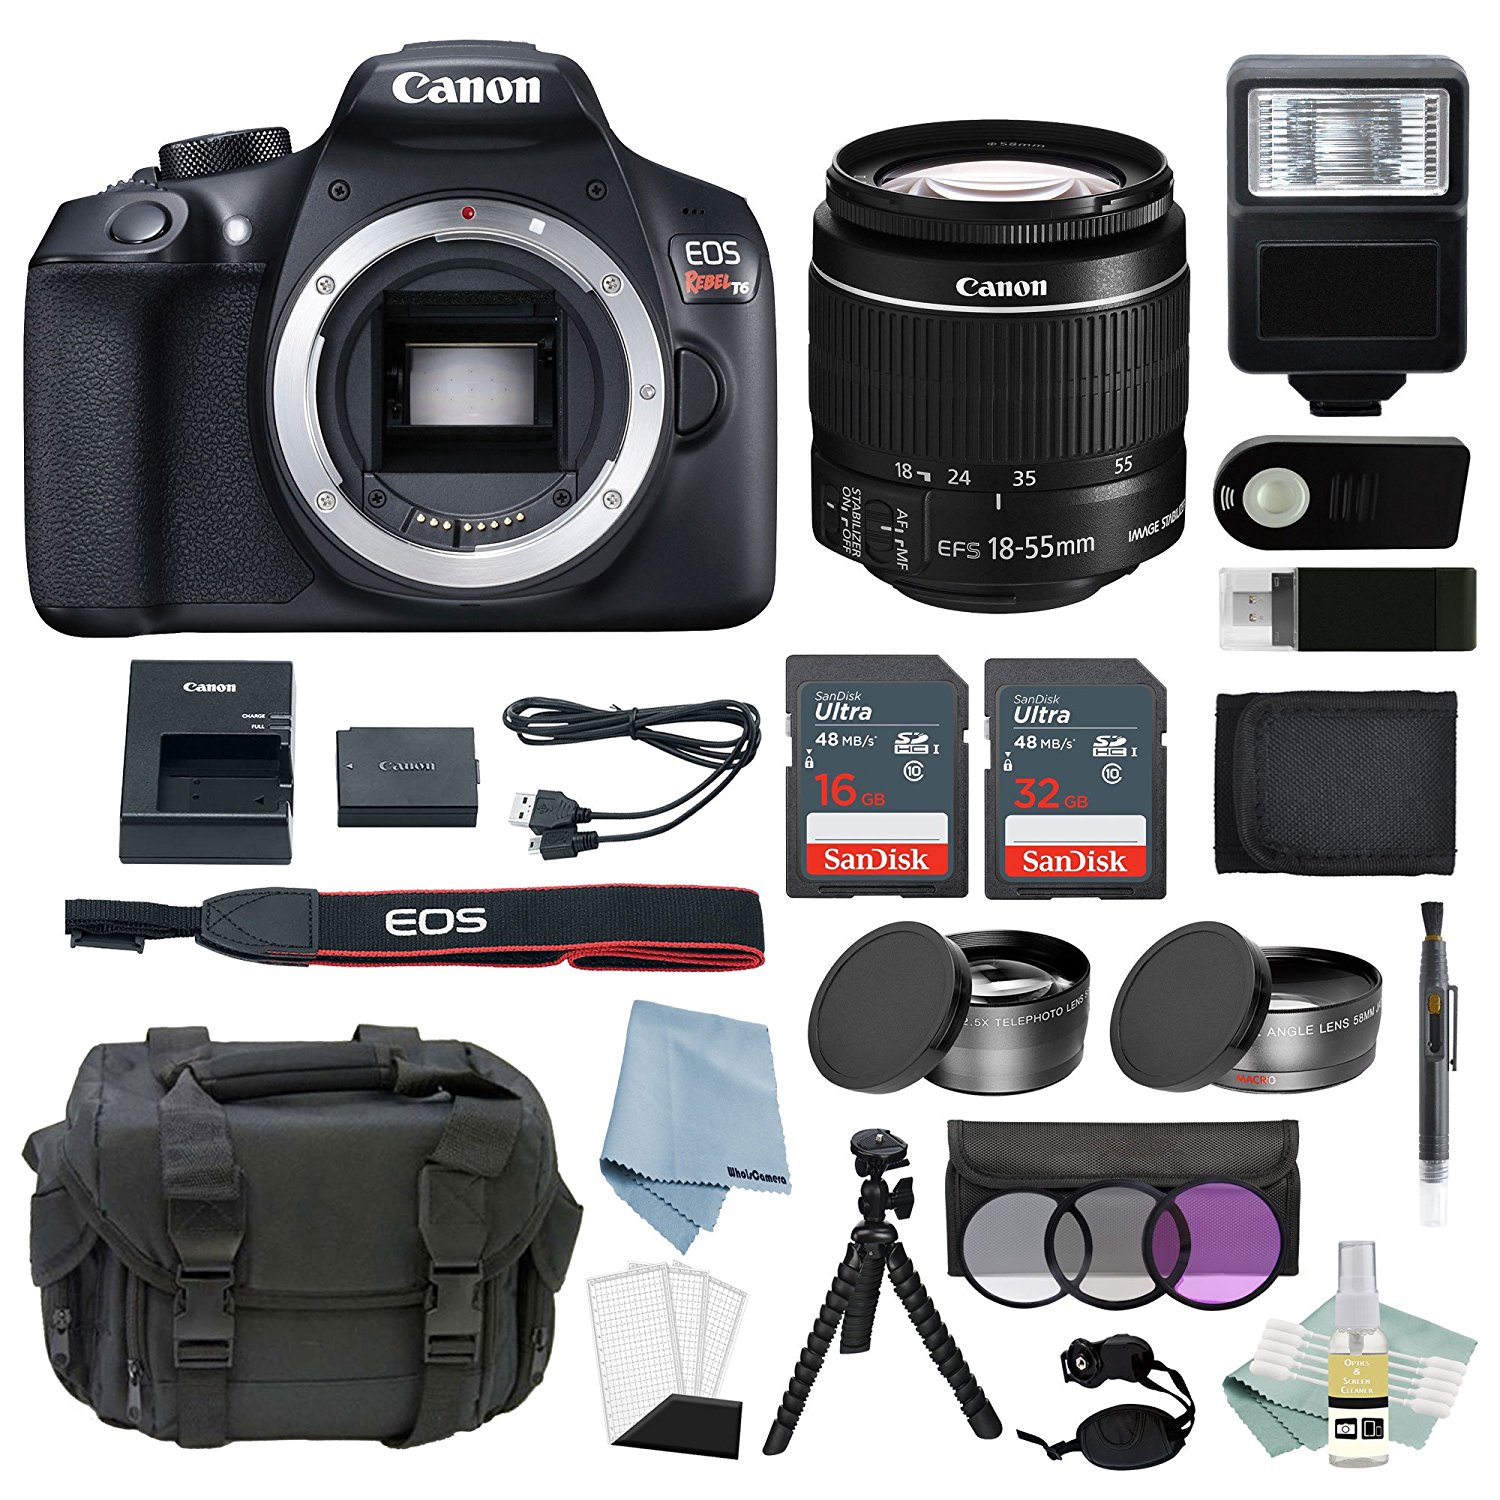 Canon EOS Rebel T6 Bundle With EF-S 18-55mm f/3.5-5.6 IS II Lens + Advanced Accessory Bundle - image 1 of 7